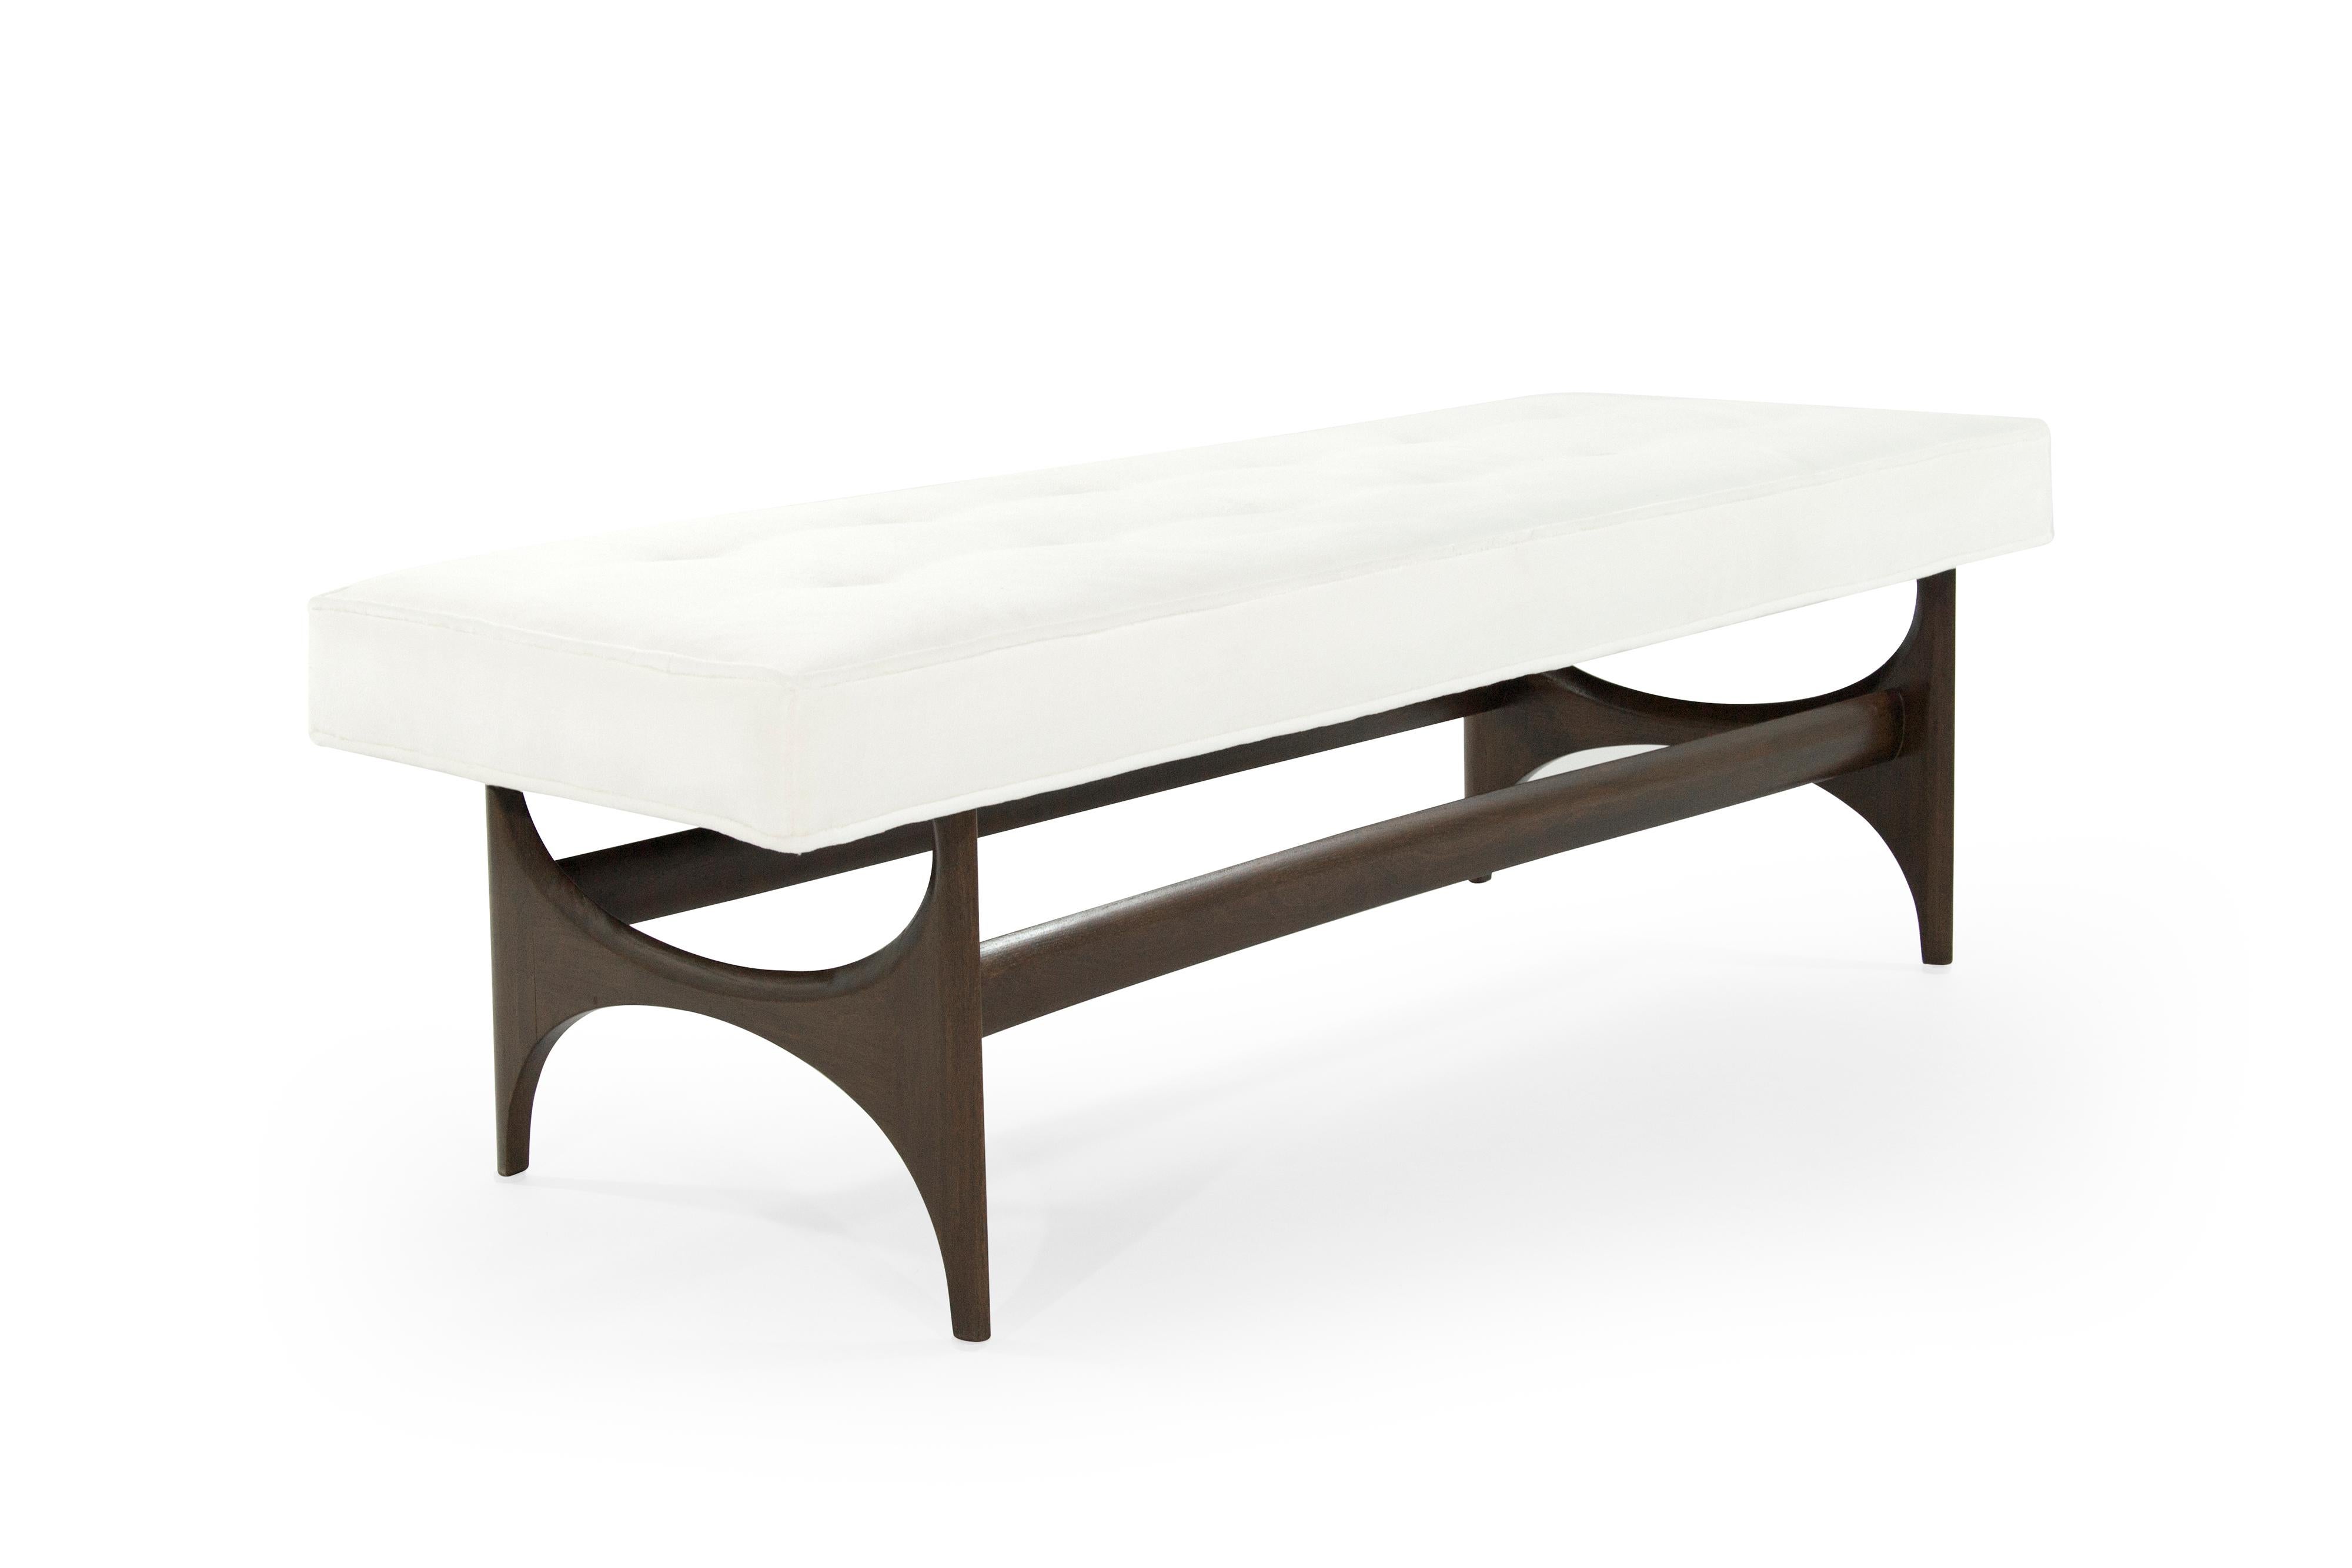 Bench featuring a fully restored sculptural walnut base. Newly upholstered in white wool.